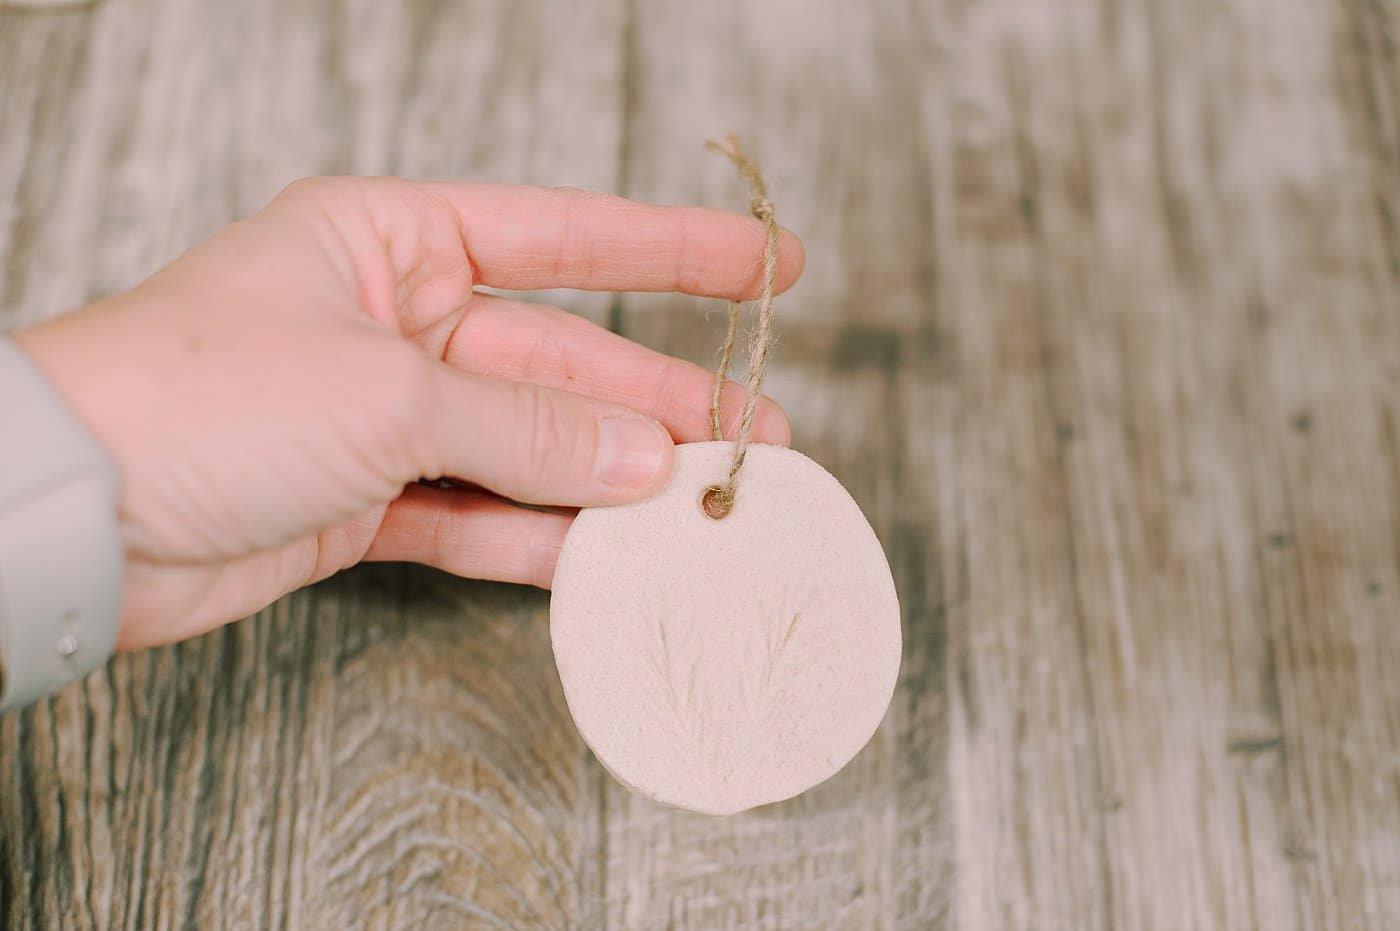 Add a twine hanging string to the salt dough ornament or salt dough gift tag.